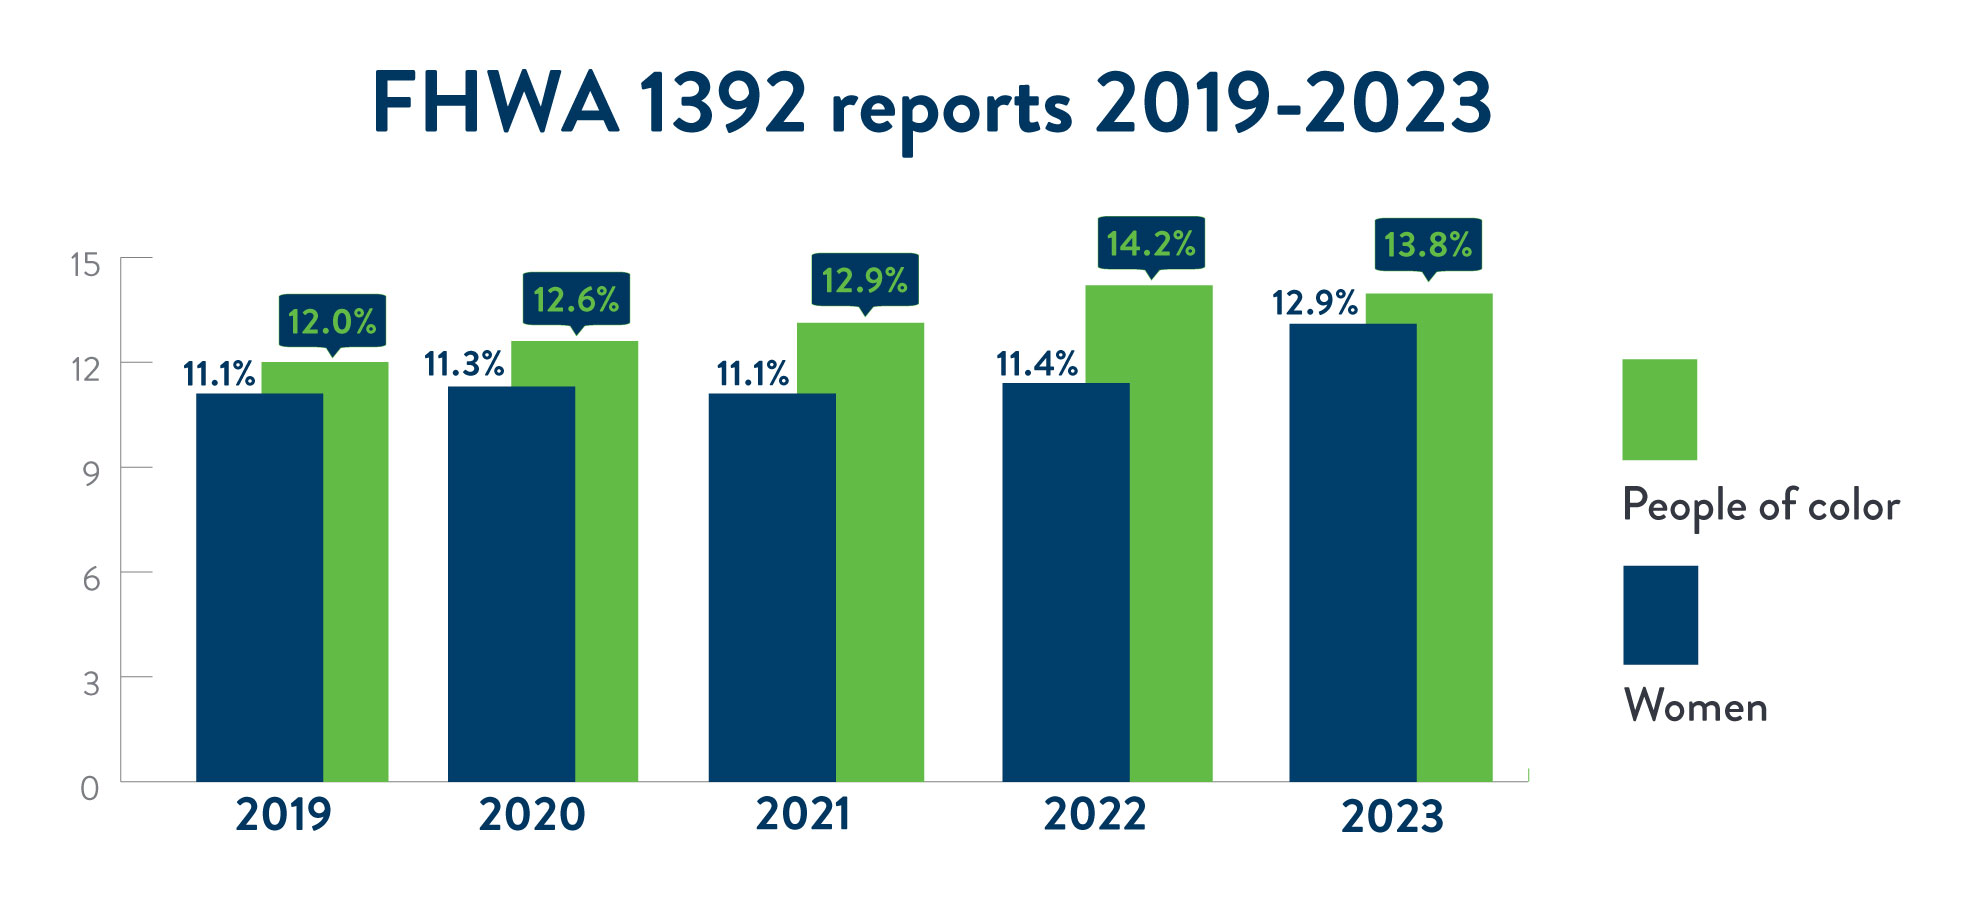 Federal Highway Administration 1392 Reports 2019 – 2023. There are two bars shown for each year, the first represents the percentage of women and the second the percentage of people of color working on federally funded highway projects in Minnesota during the last week of July for that year. In 2019, 11.1% of workers were women and 12.0% were people of color. In 2020, 11.3% of workers were women and 12.6% were people of color. In 2021, 11.4% of workers were women and 12.9% were people of color. In 2022, 11.4% of workers were women and 14.2 % were of color. In 2023, 12.9% of workers were women and 13.8% were people of color. Alternatively, the percentages of women were 11.1%, 11.3%, 11.1% and 12.9% in 2019 through 2023. The percentages of people of color were 12.0%, 12.6%, 14.2% and 13.8% in 2019 through 2023.